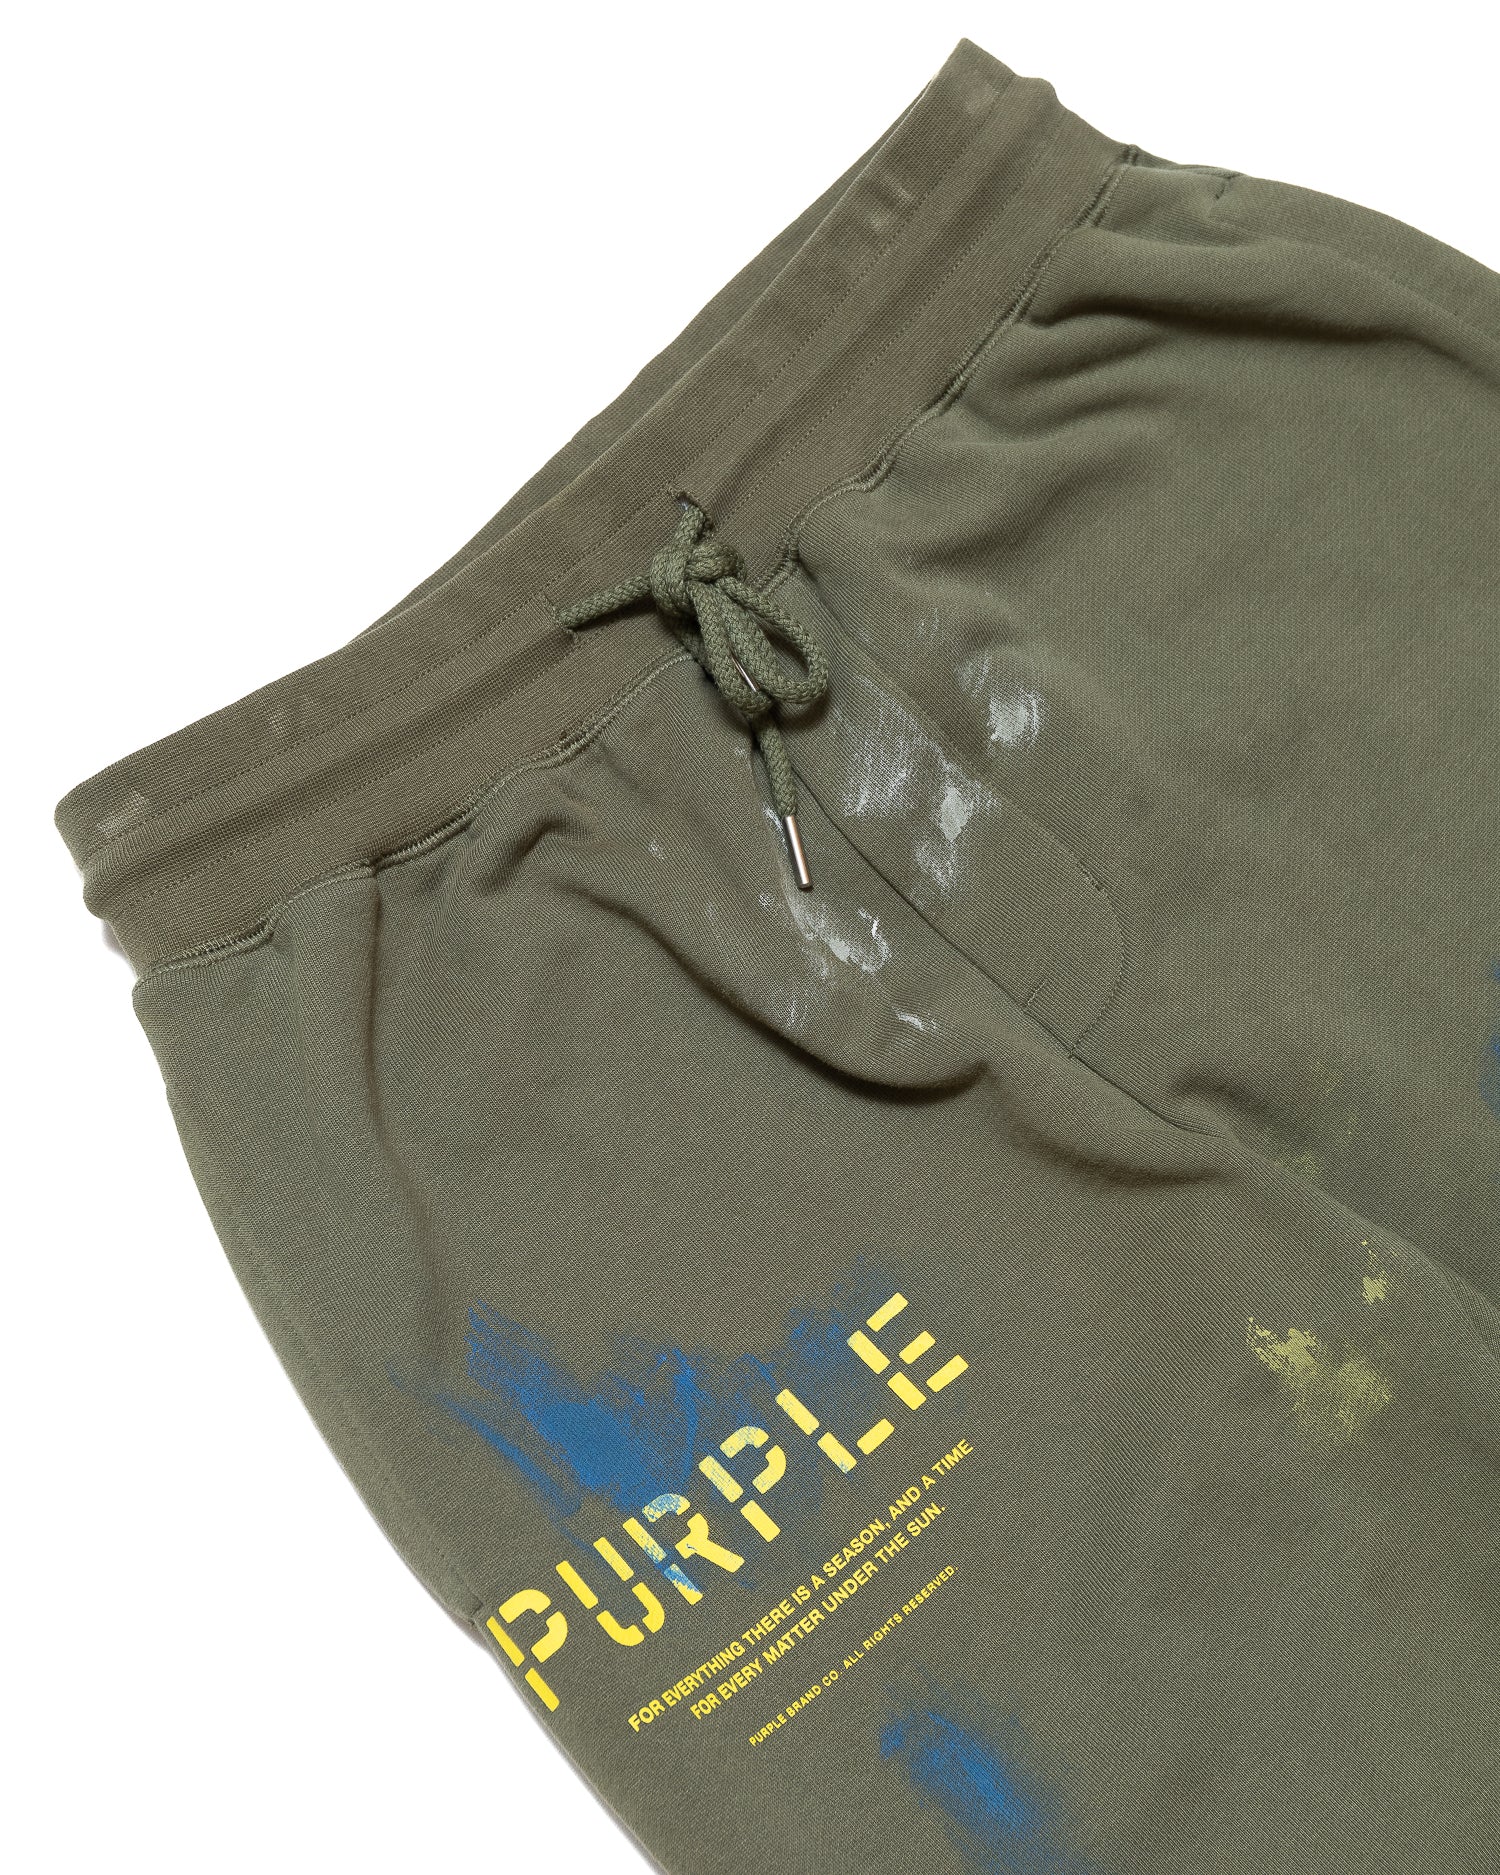 Purple Brand French Terry Military Stencil W/ Paint Joggers